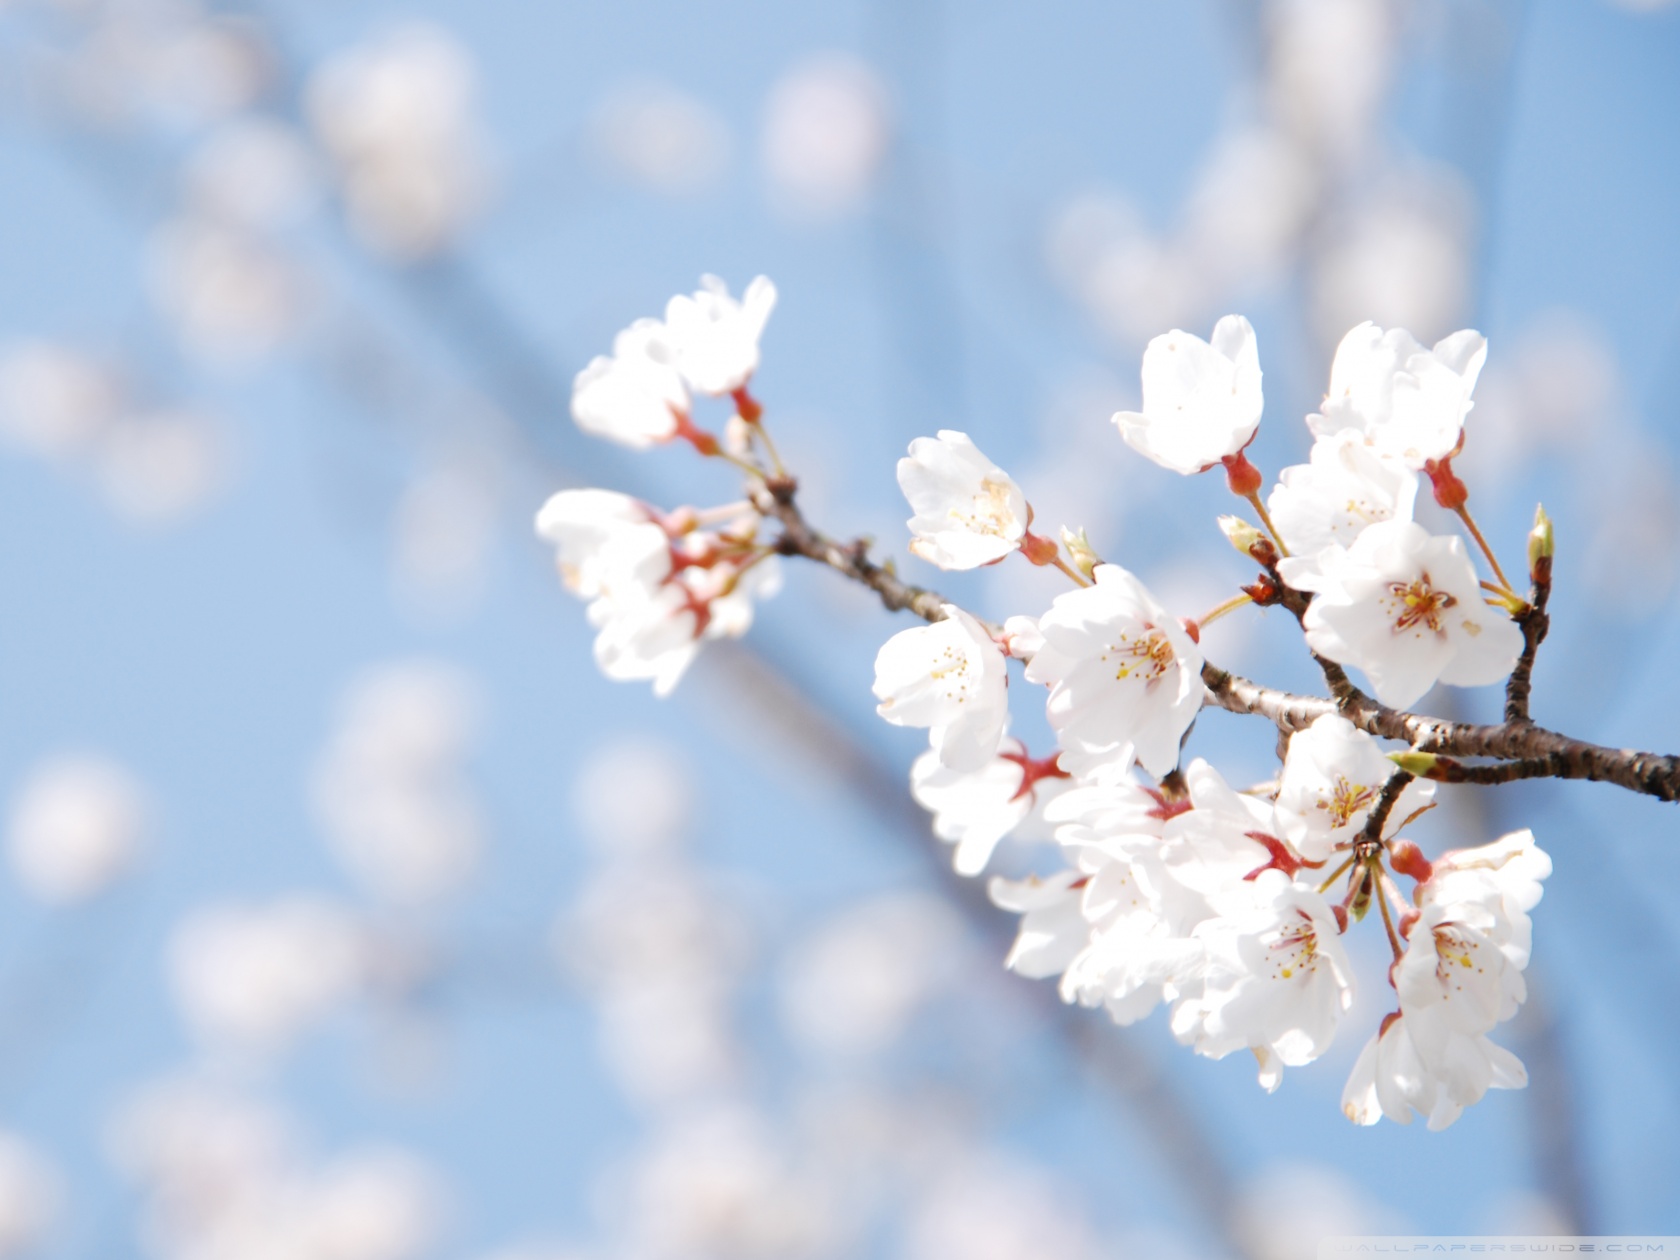 Cherry Blossom And Blue Sky Ultra HD Desktop Background Wallpaper for 4K UHD TV, Multi Display, Dual Monitor, Tablet